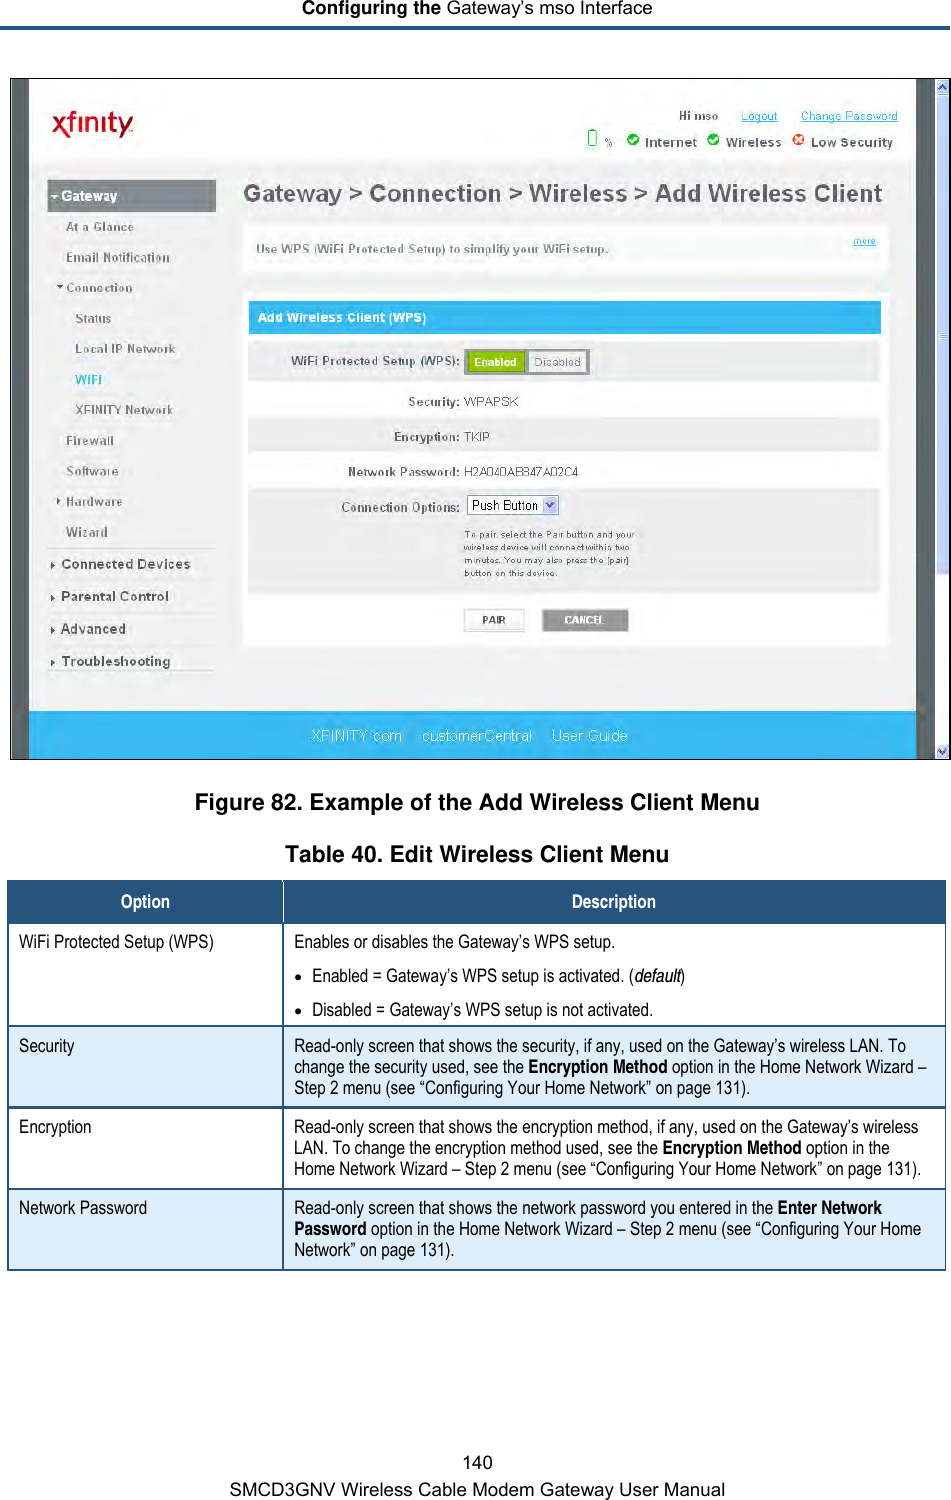 Configuring the Gateway’s mso Interface 140 SMCD3GNV Wireless Cable Modem Gateway User Manual  Figure 82. Example of the Add Wireless Client Menu Table 40. Edit Wireless Client Menu Option Description WiFi Protected Setup (WPS)  Enables or disables the Gateway’s WPS setup. • Enabled = Gateway’s WPS setup is activated. (default) • Disabled = Gateway’s WPS setup is not activated. Security Read-only screen that shows the security, if any, used on the Gateway’s wireless LAN. To change the security used, see the Encryption Method option in the Home Network Wizard – Step 2 menu (see “Configuring Your Home Network” on page 131). Encryption Read-only screen that shows the encryption method, if any, used on the Gateway’s wireless LAN. To change the encryption method used, see the Encryption Method option in the Home Network Wizard – Step 2 menu (see “Configuring Your Home Network” on page 131). Network Password Read-only screen that shows the network password you entered in the Enter Network Password option in the Home Network Wizard – Step 2 menu (see “Configuring Your Home Network” on page 131). 